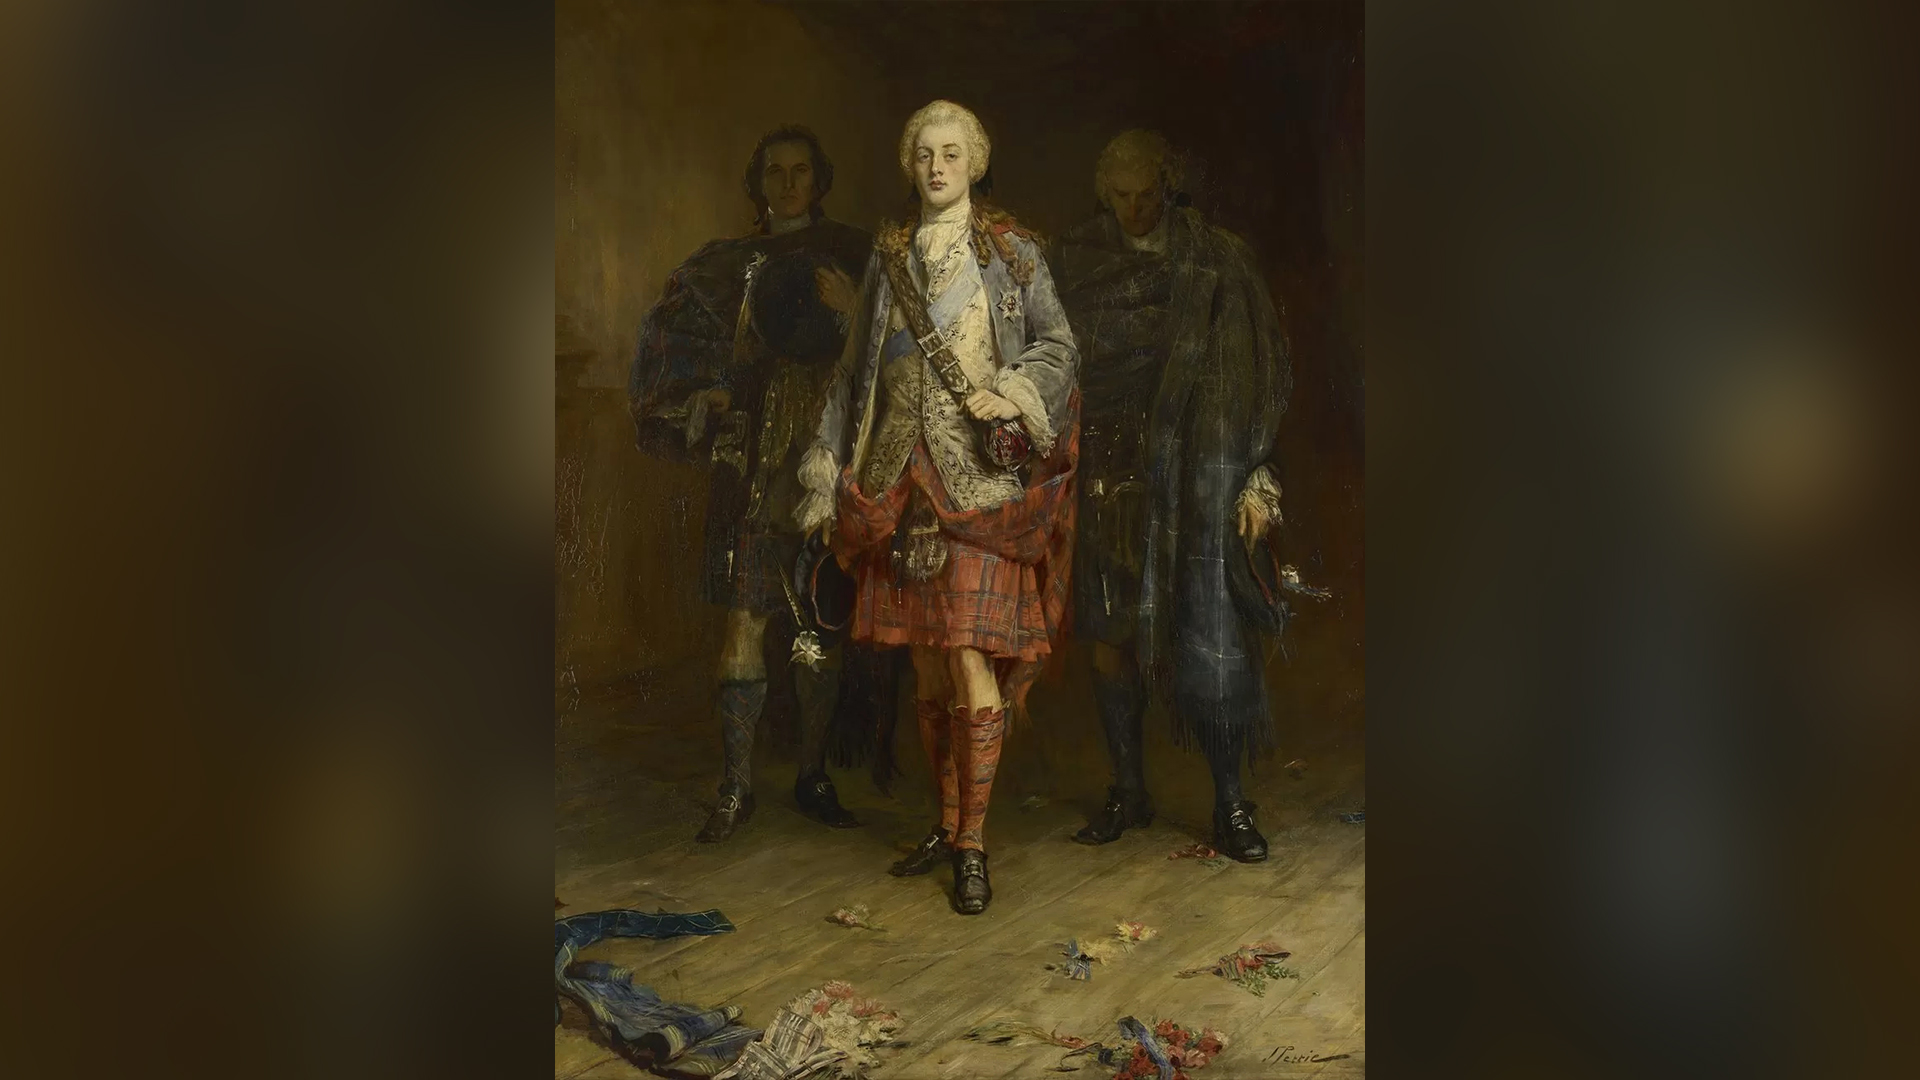 This 19th century painting of Bonnie Prince Charlie now hangs in the Palace of Hollyroodhouse in Edinburgh, the official residence of the British monarch in Scotland.